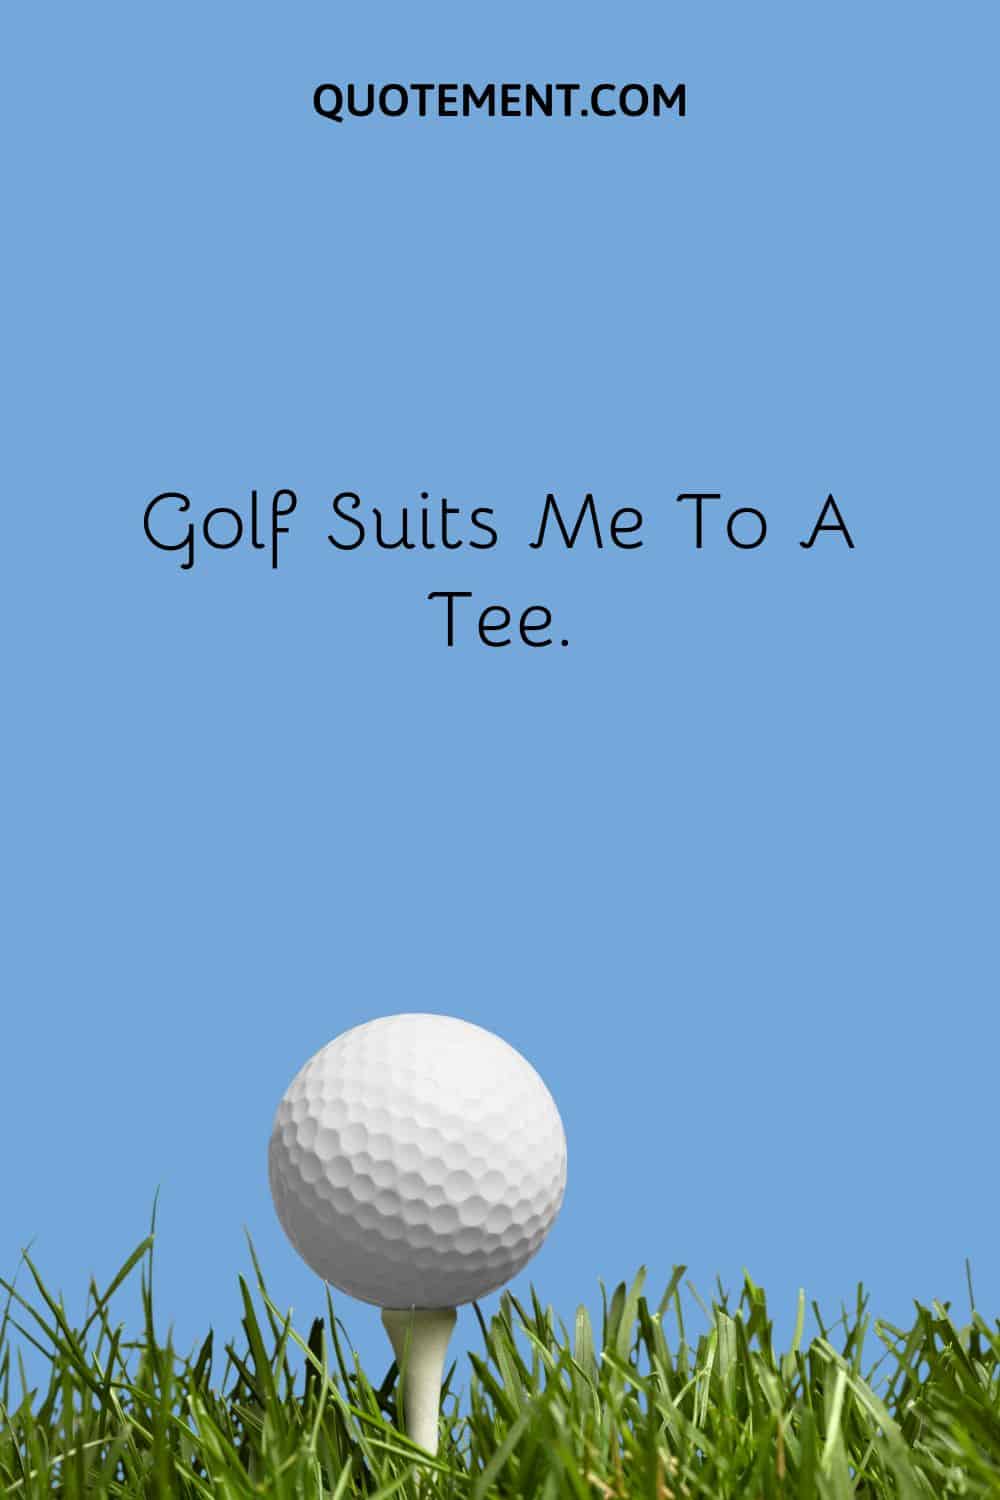 Golf Suits Me To A Tee.